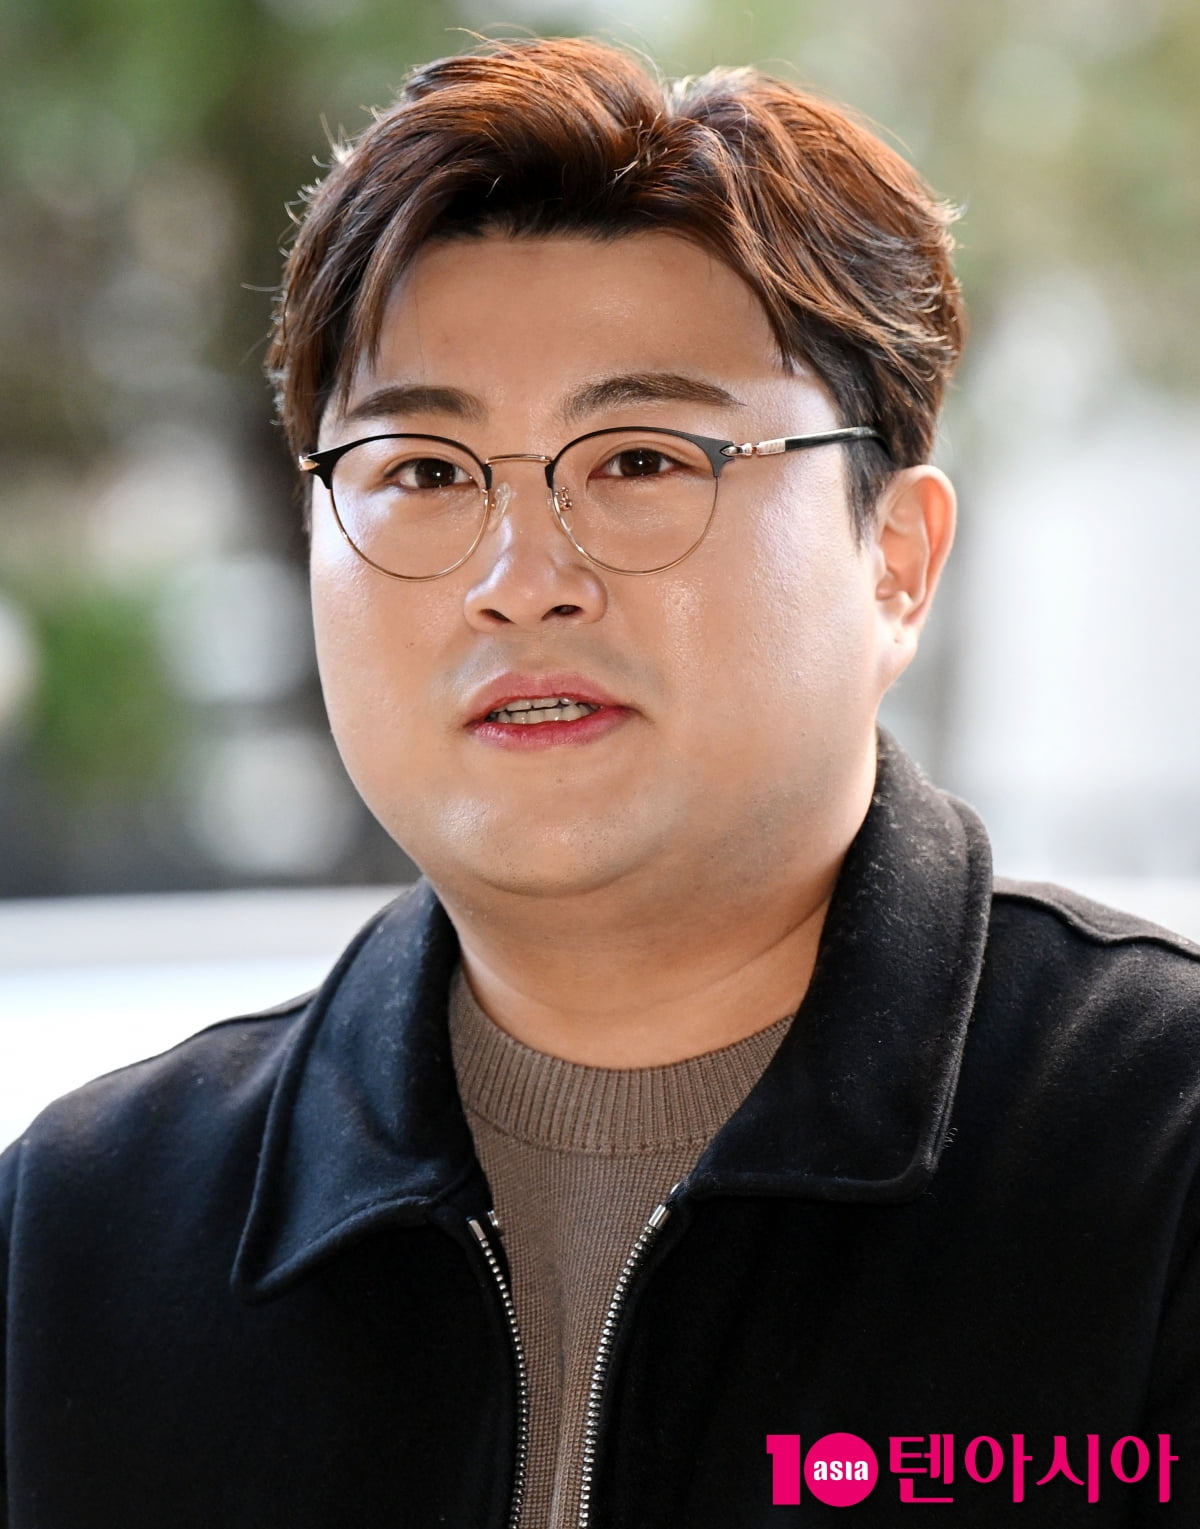 Kim Ho-joong apologizes in a huff as criticism of 'thief attendance' grows